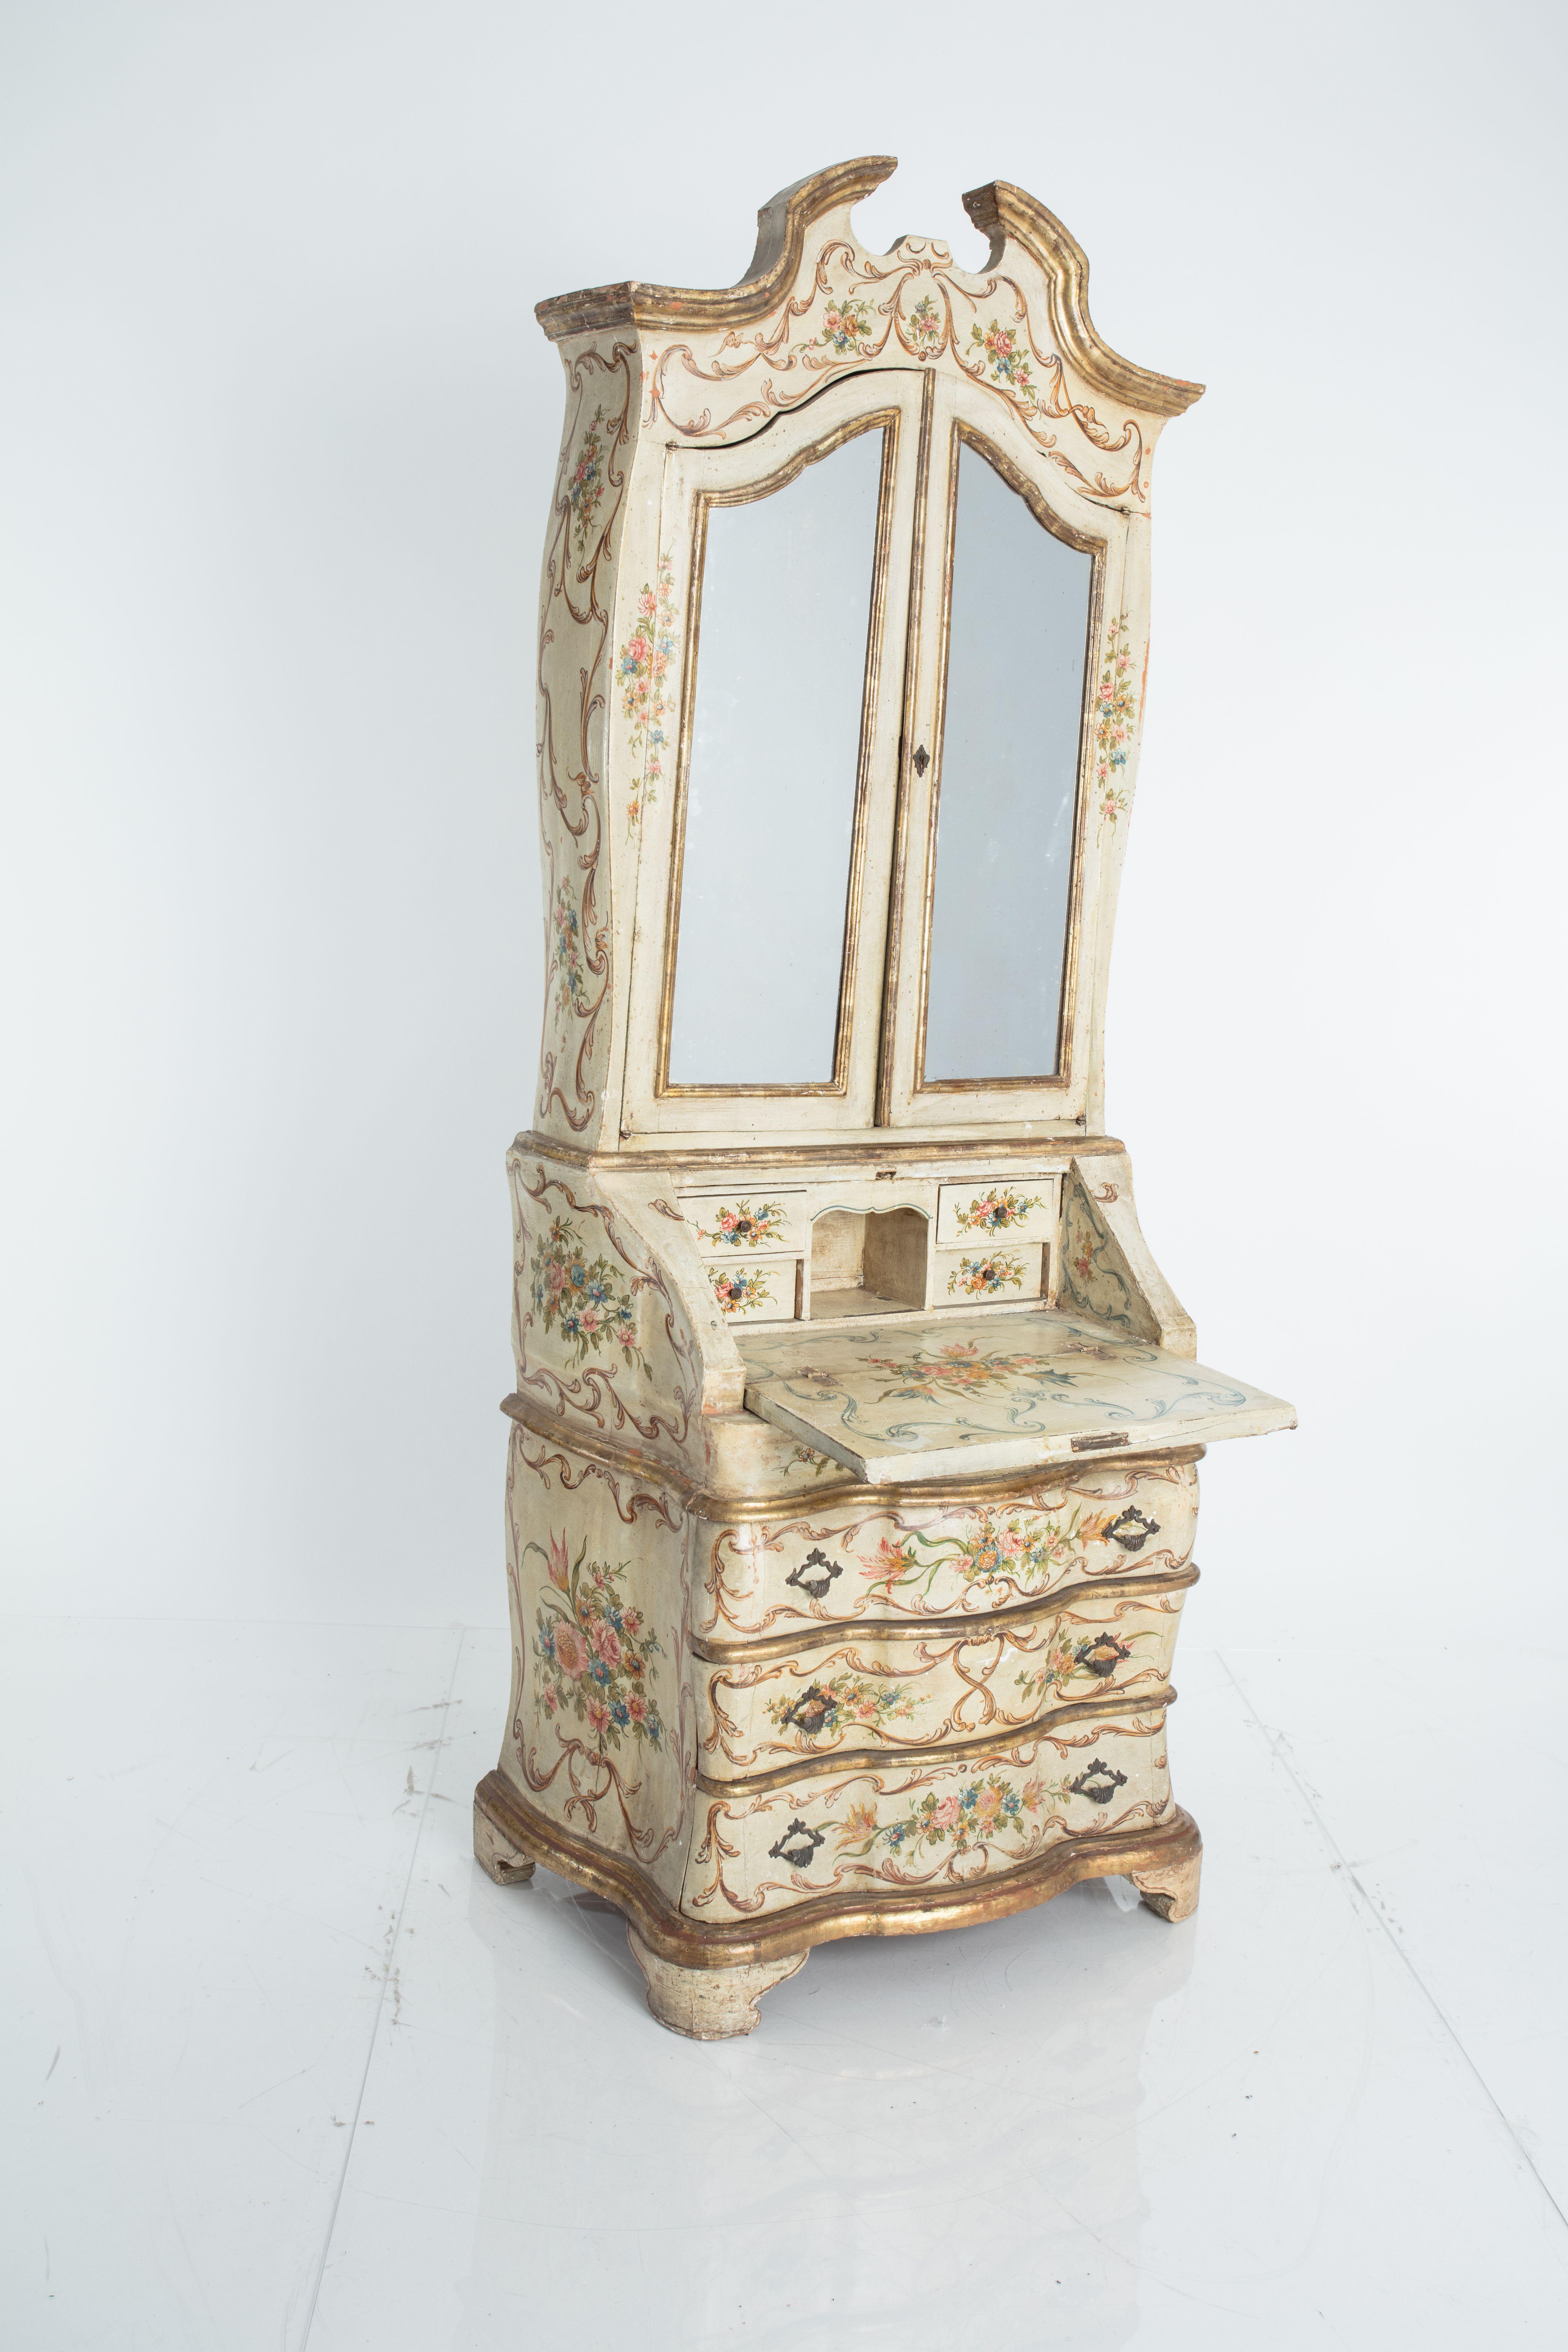 Other Antique Rococo Style Venetian Secretary Cabinet with Gilt and Floral Motif